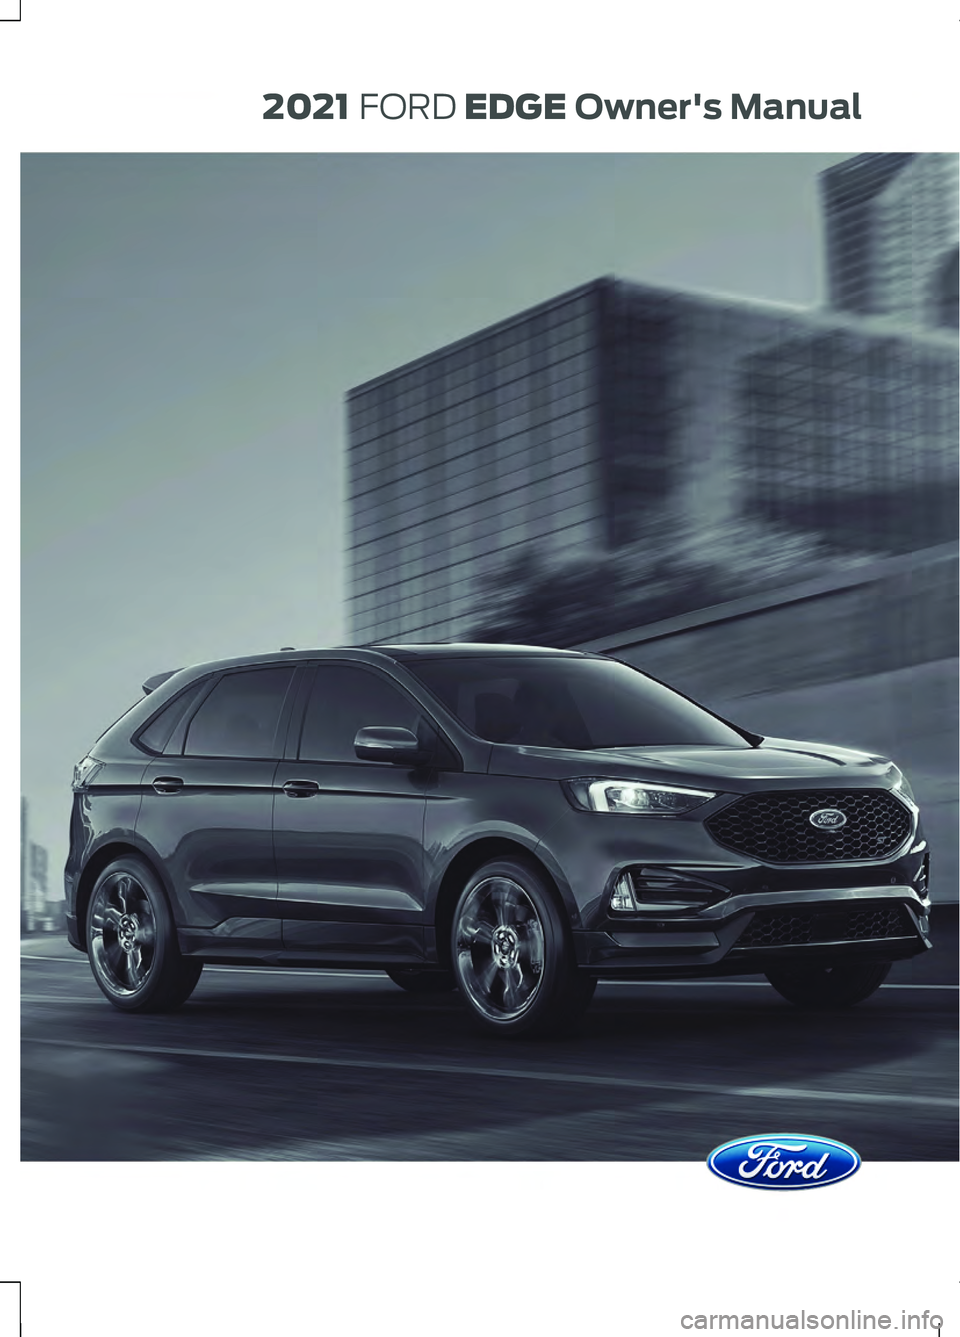 FORD EDGE 2021  Owners Manual  2021
 FORD EDGE Owner's Manual 